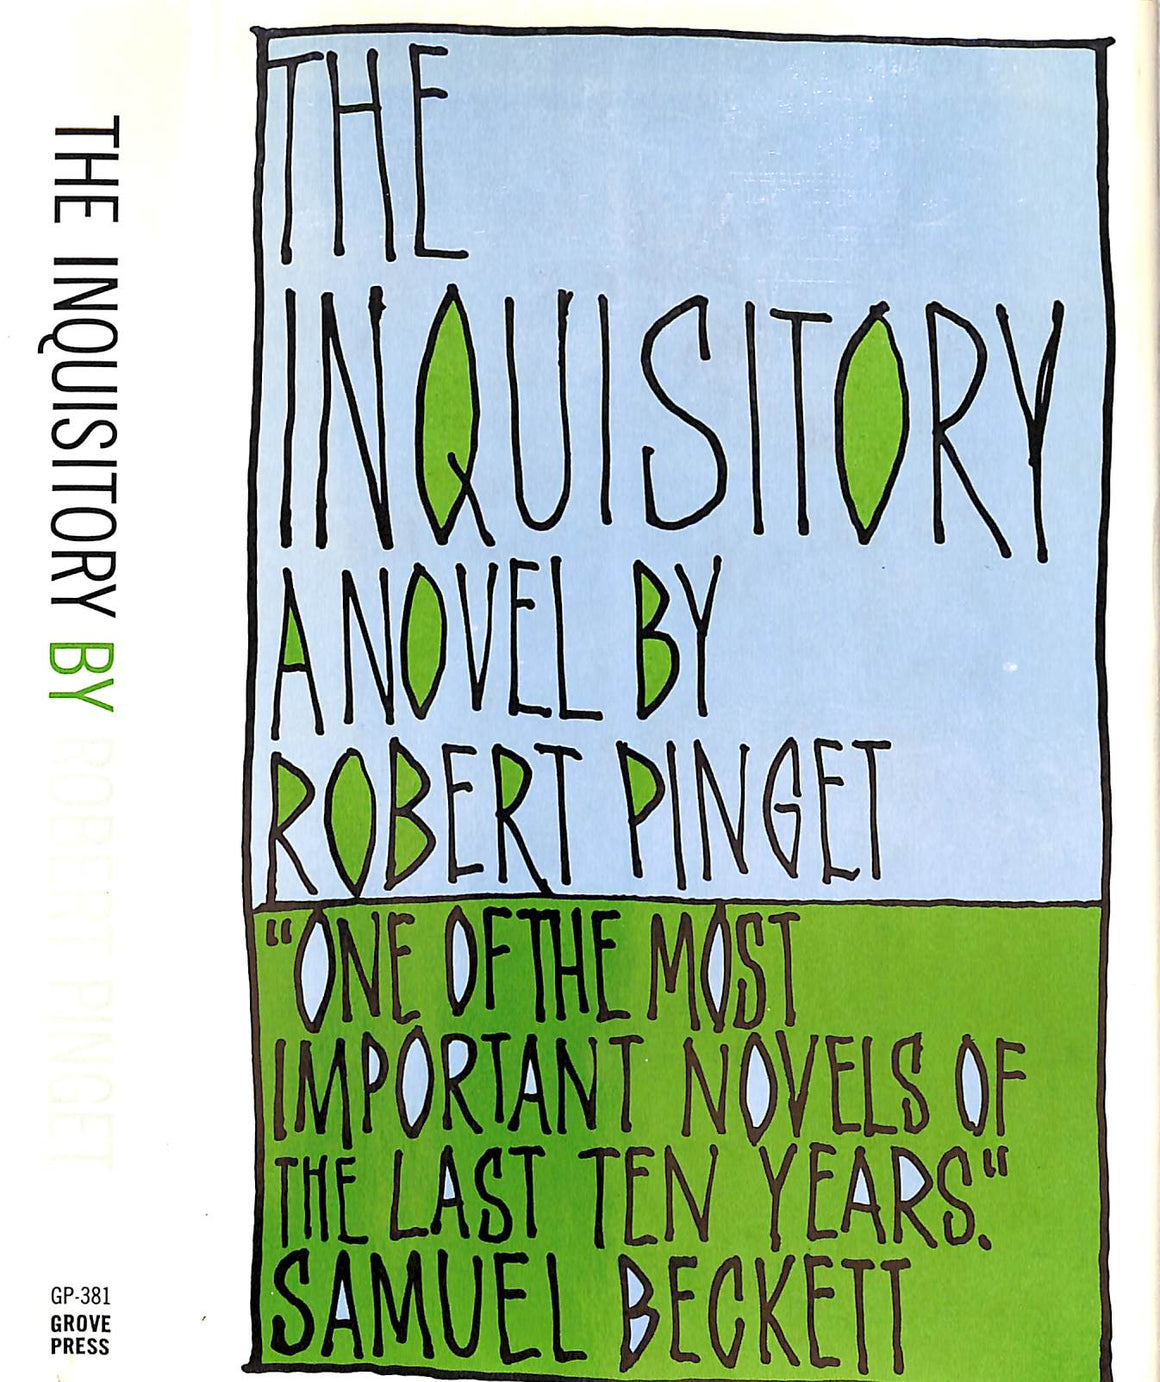 "The Inquisitory" 1966 PINGET, Robert (SOLD)